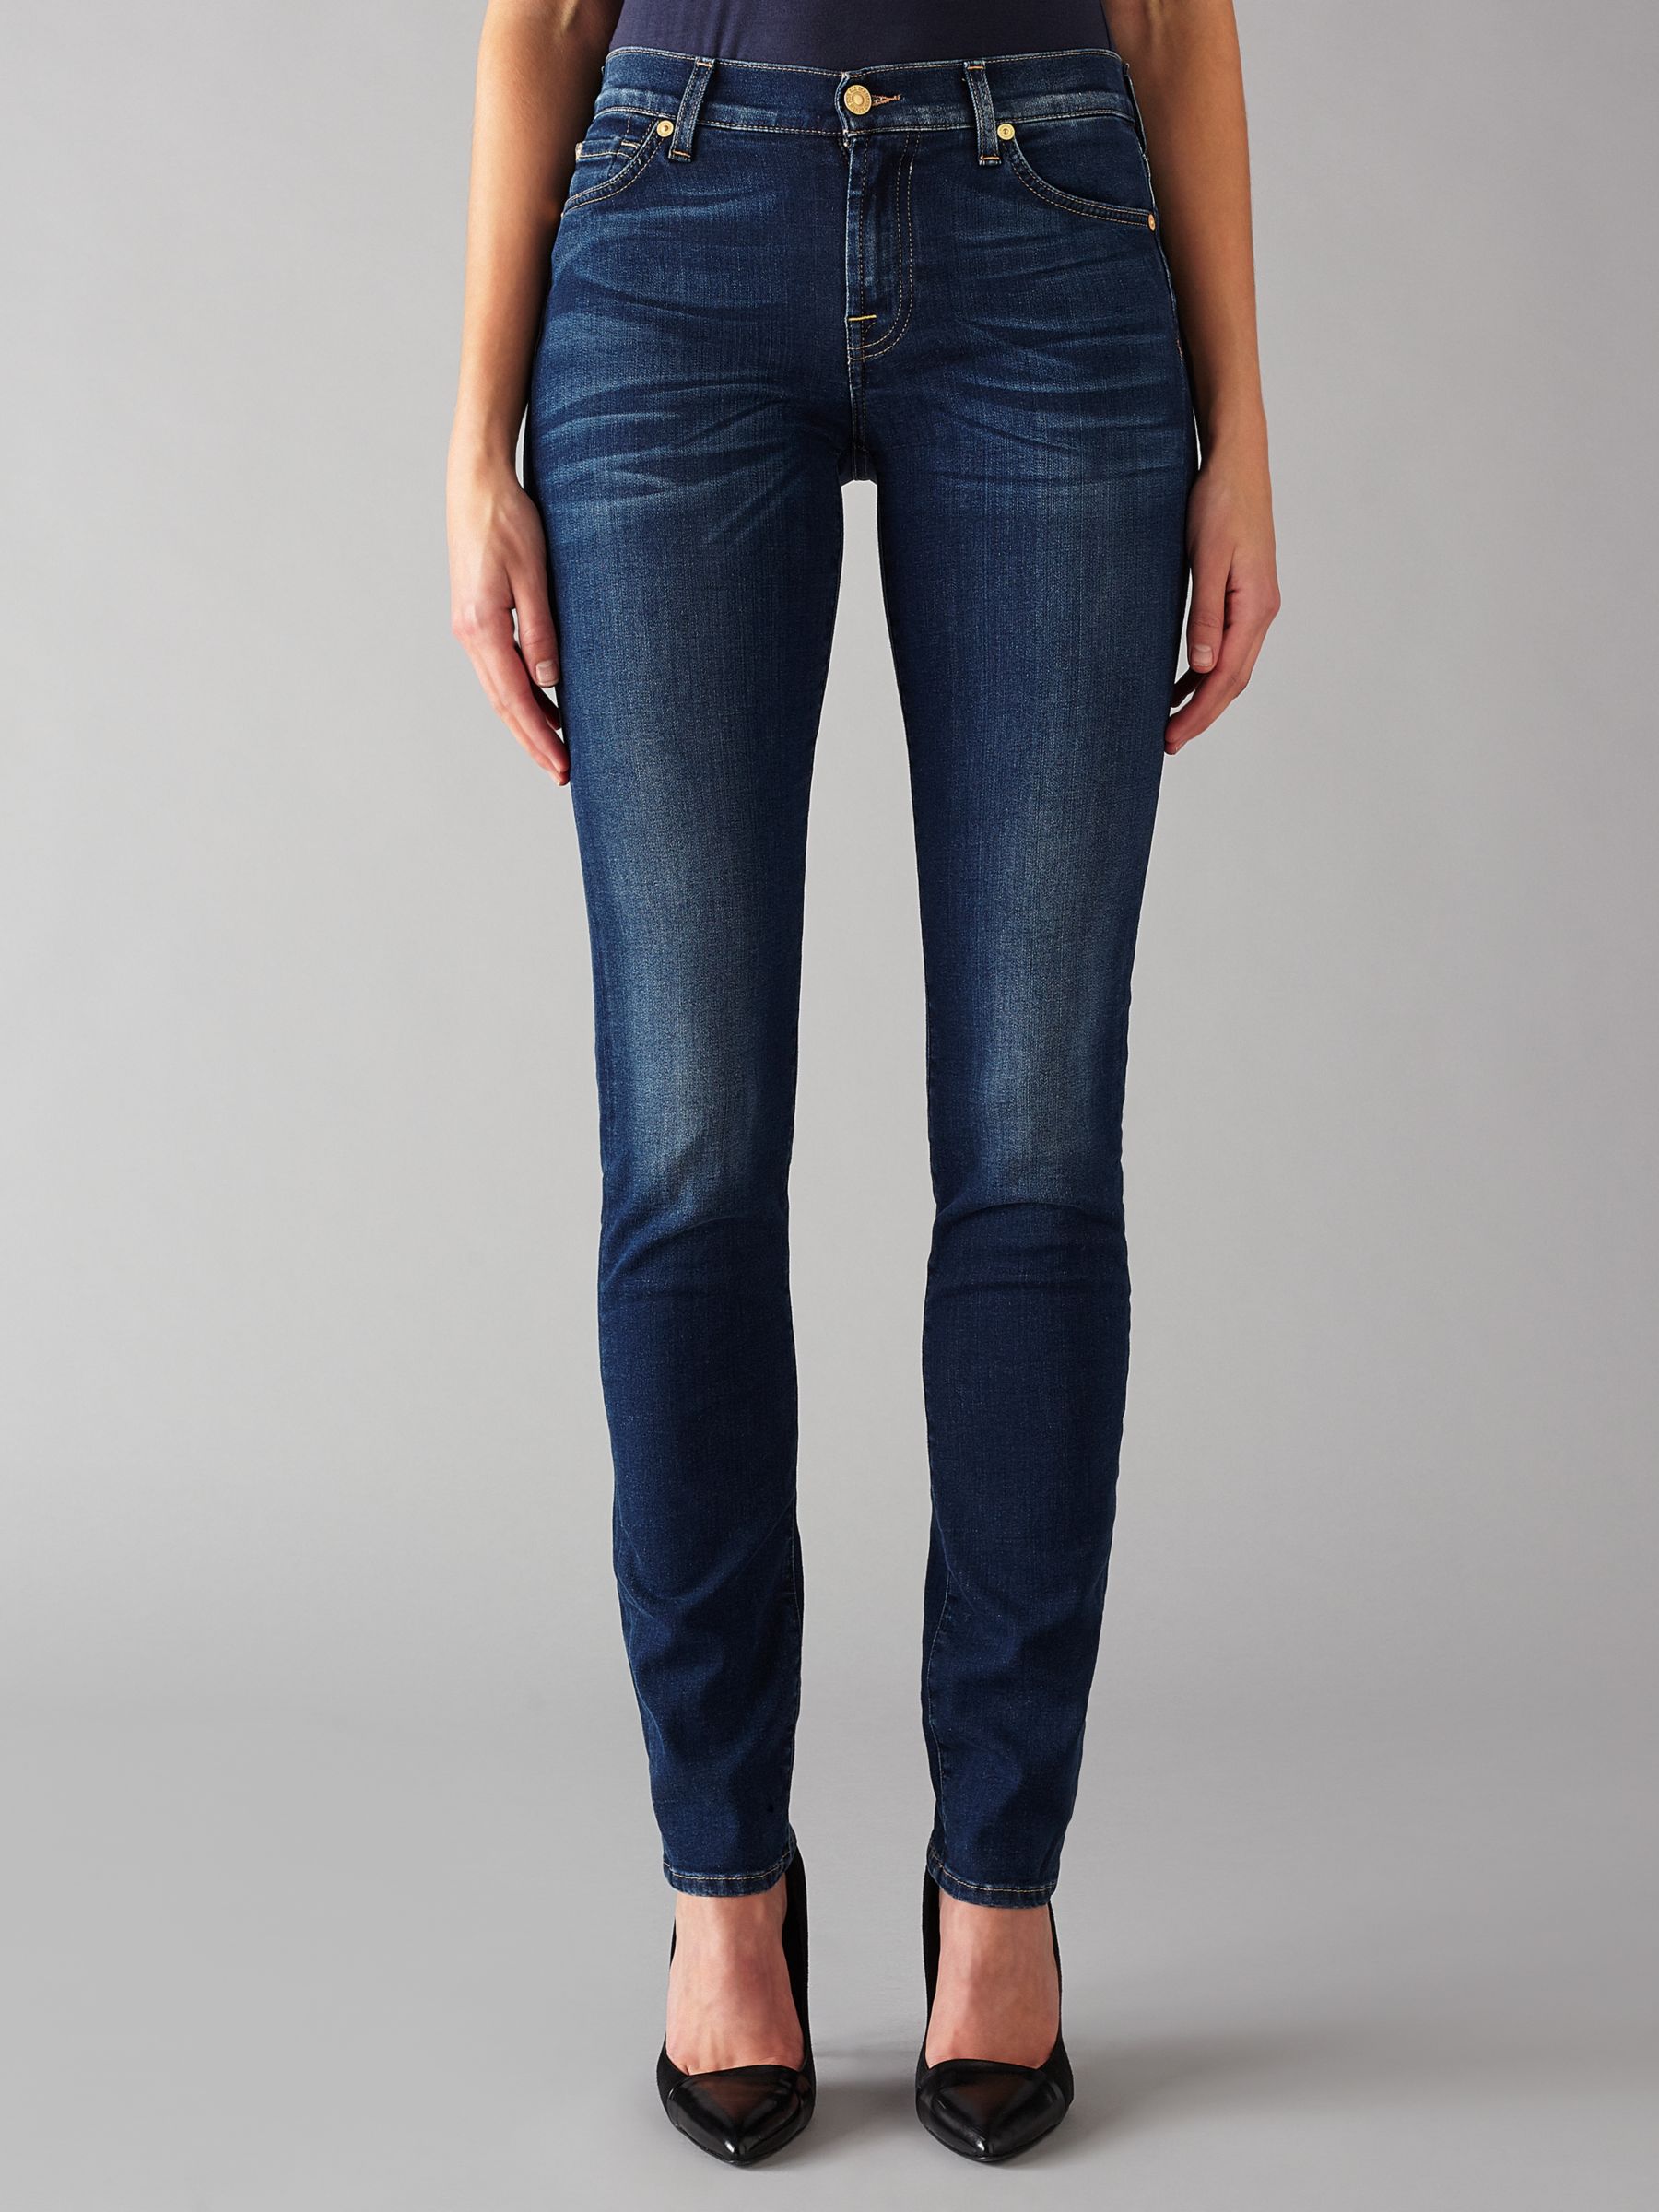 seven 4 all mankind jeans